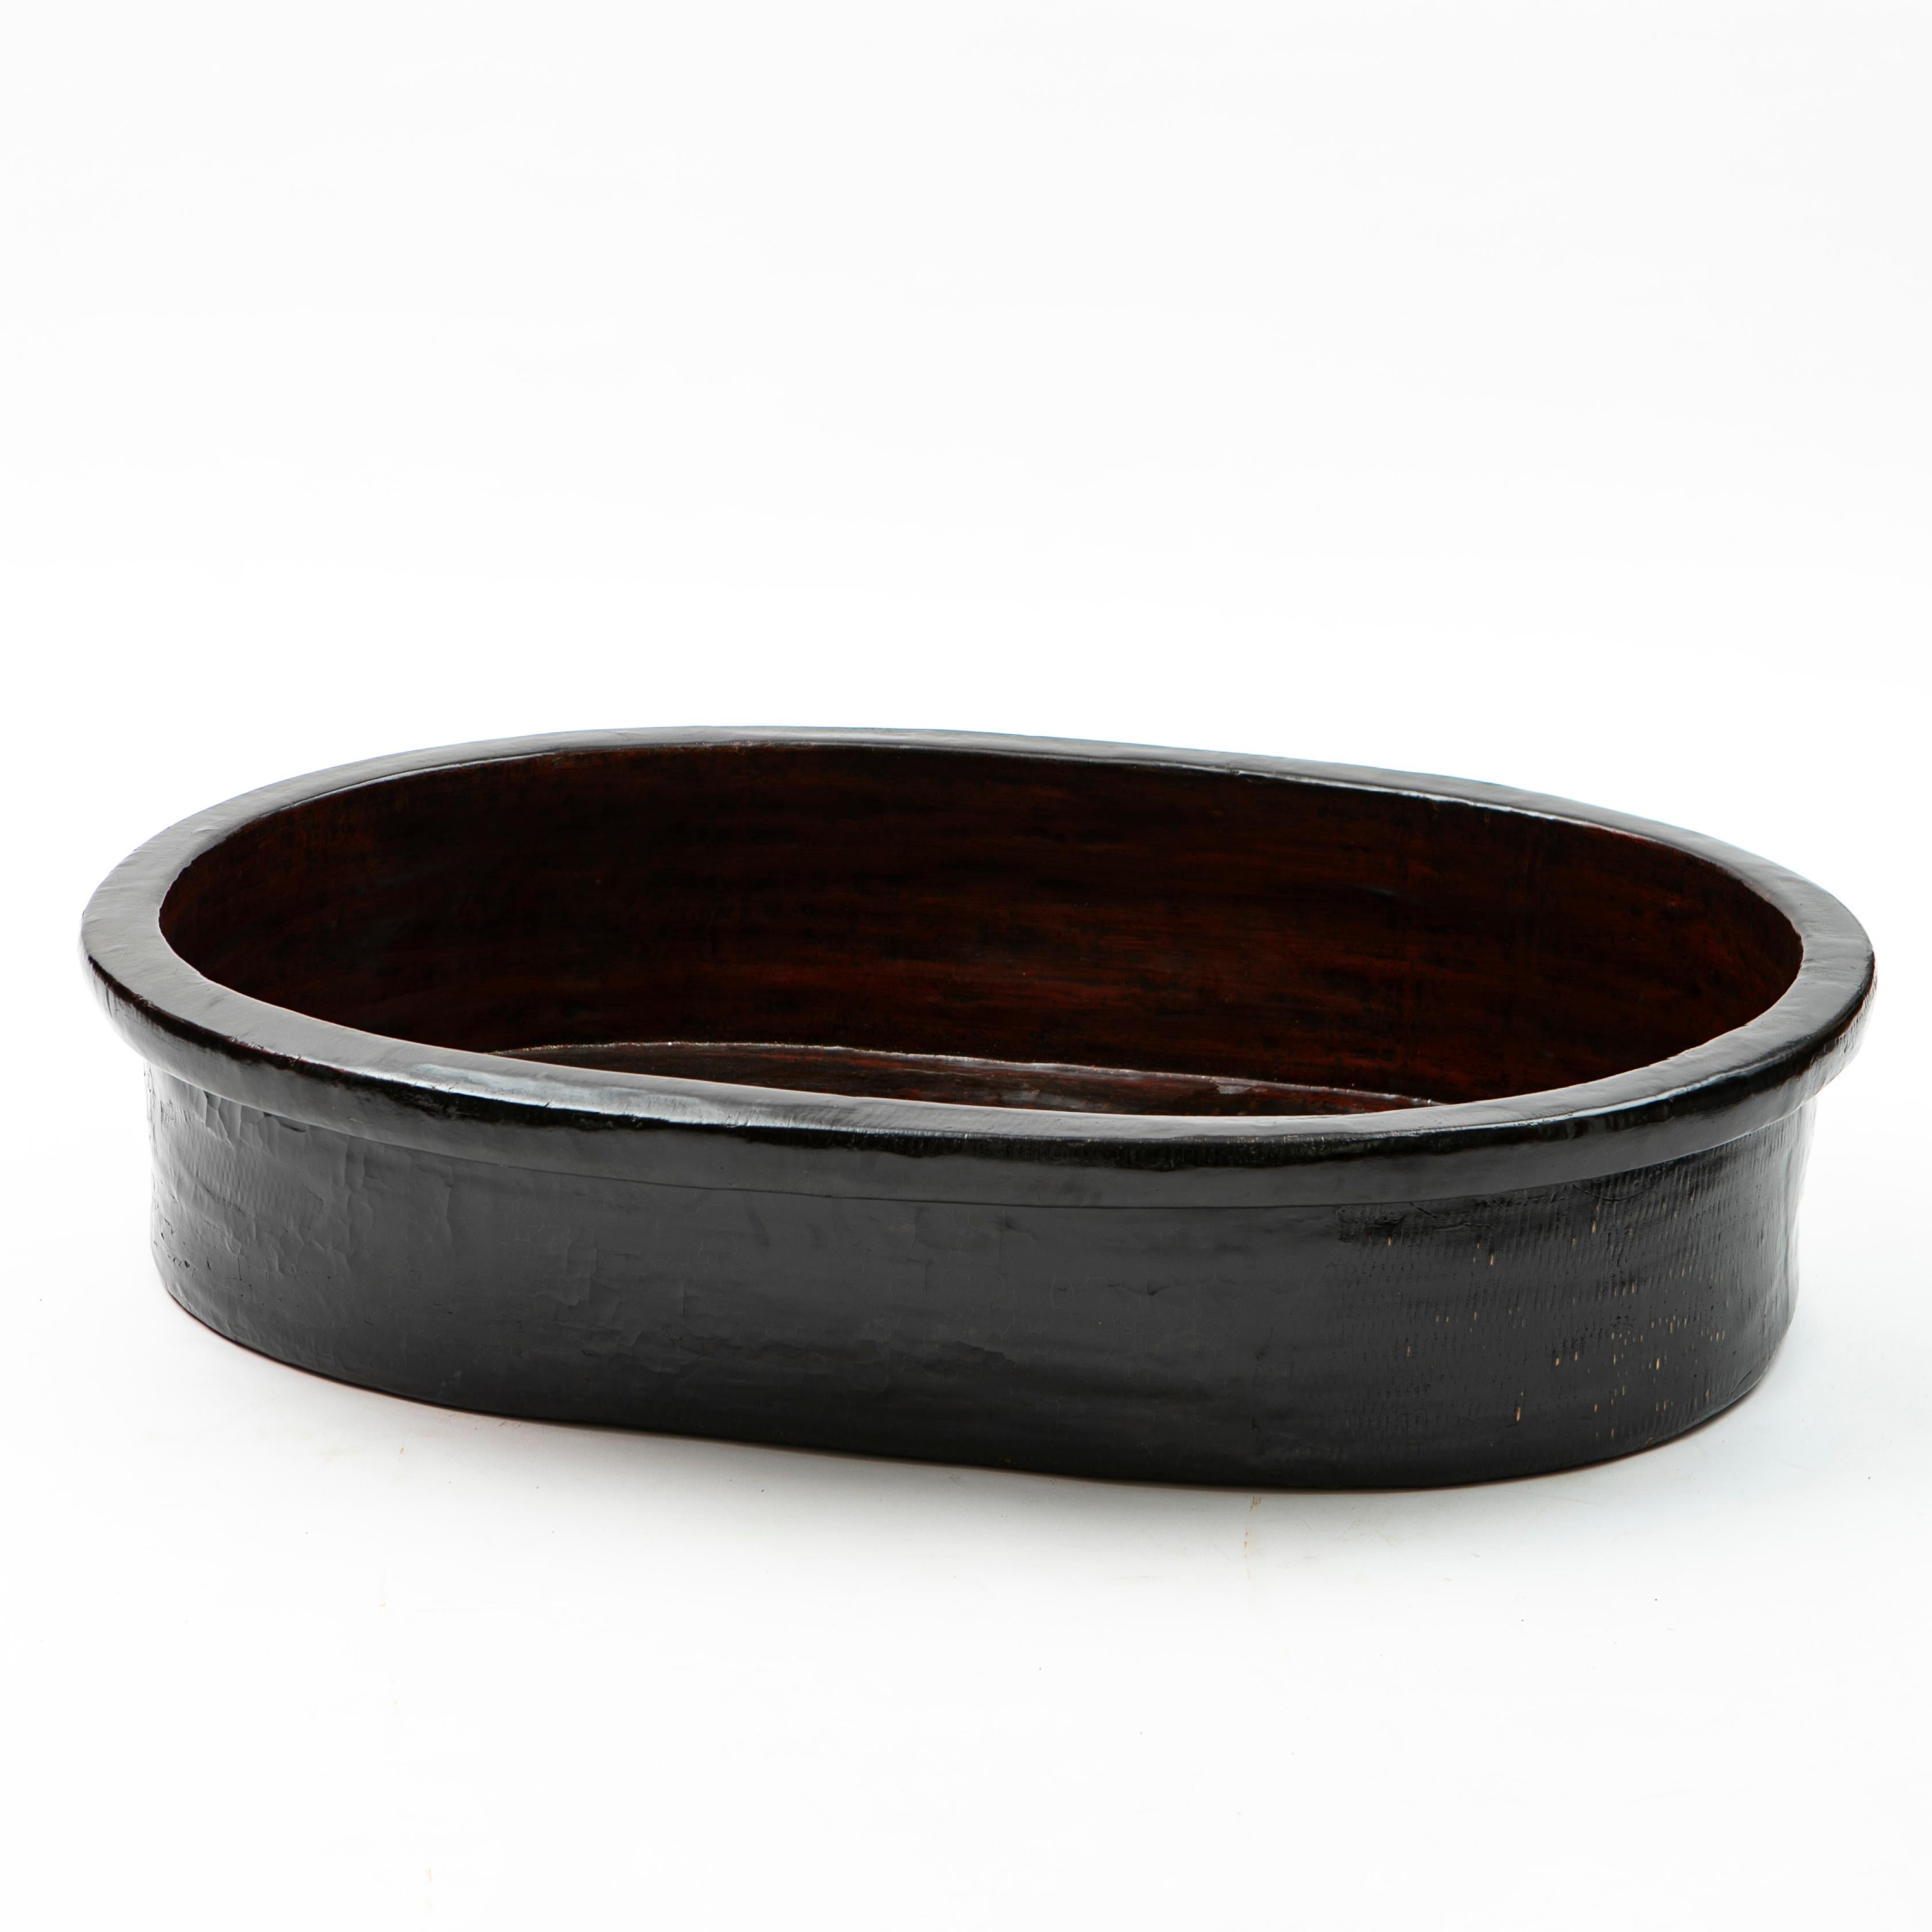 Large Qing dynasty oval wooden trough or tub with original thick black and red lacquer.
China, early 19th century.

Due to the tub's large size, it has many storage options, for example as a stylish dog basket.